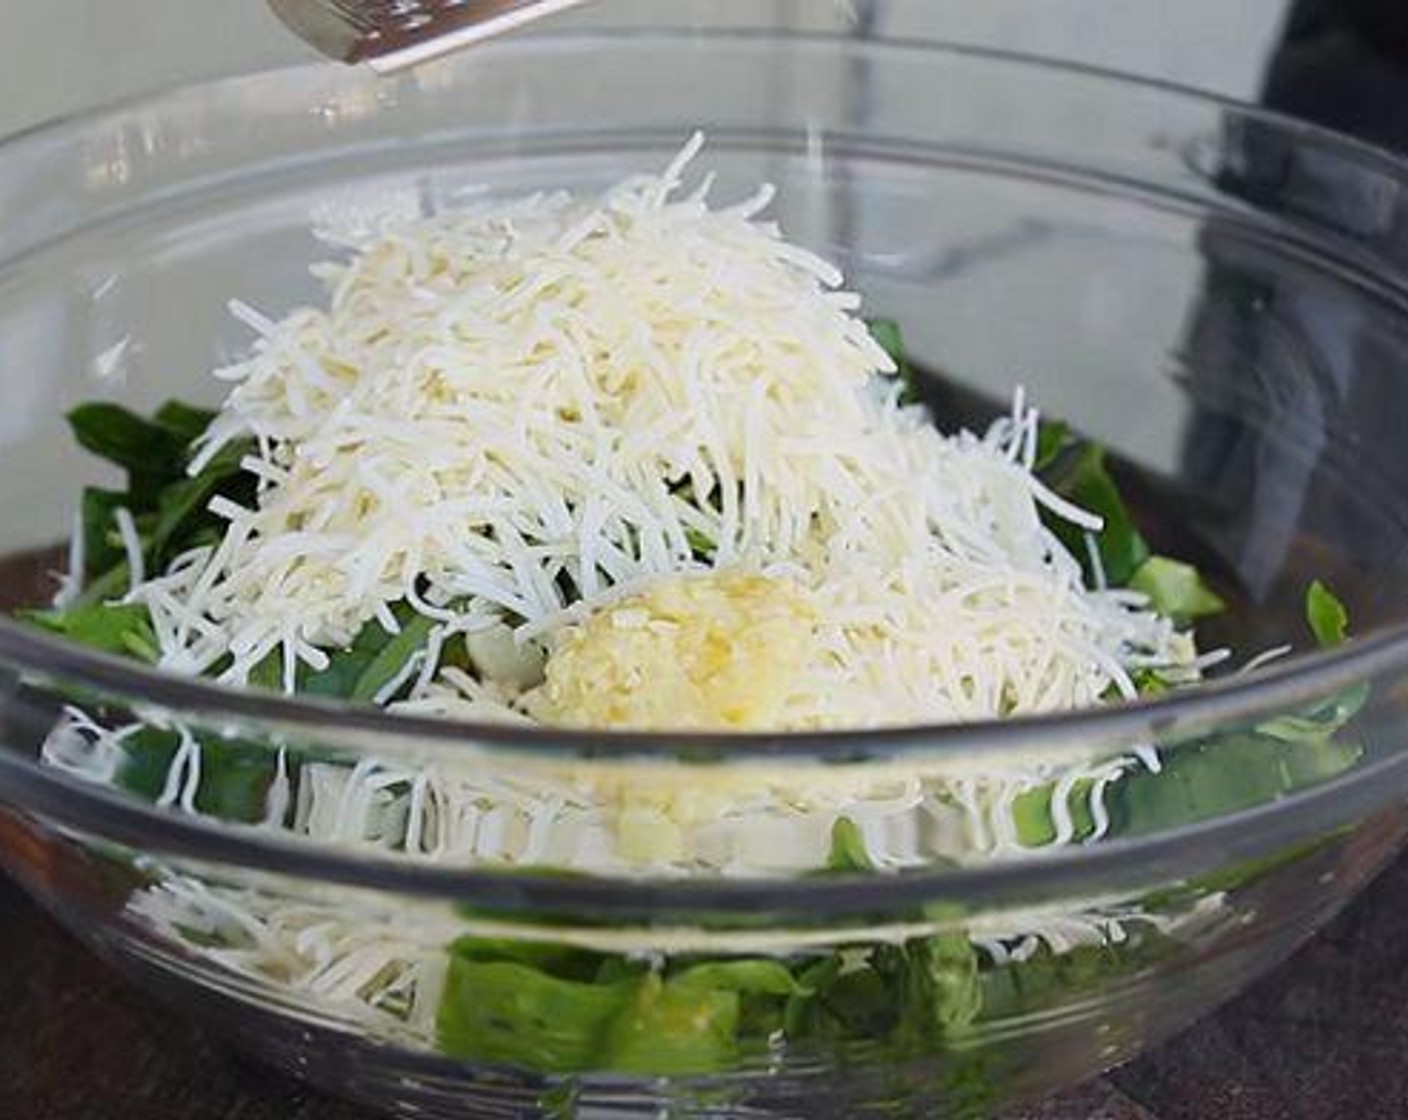 step 2 In a large bowl, mix together Philadelphia Original Soft Cheese (1 pckg), Artichoke Hearts (1 can), Fresh Baby Spinach (1 cup), Shredded Italian Blend Cheese (1 cup), Parmesan Cheese (1/4 cup), Garlic (2 cloves), Onion Powder (1/2 tsp), Salt (to taste), and Ground Black Pepper (to taste).